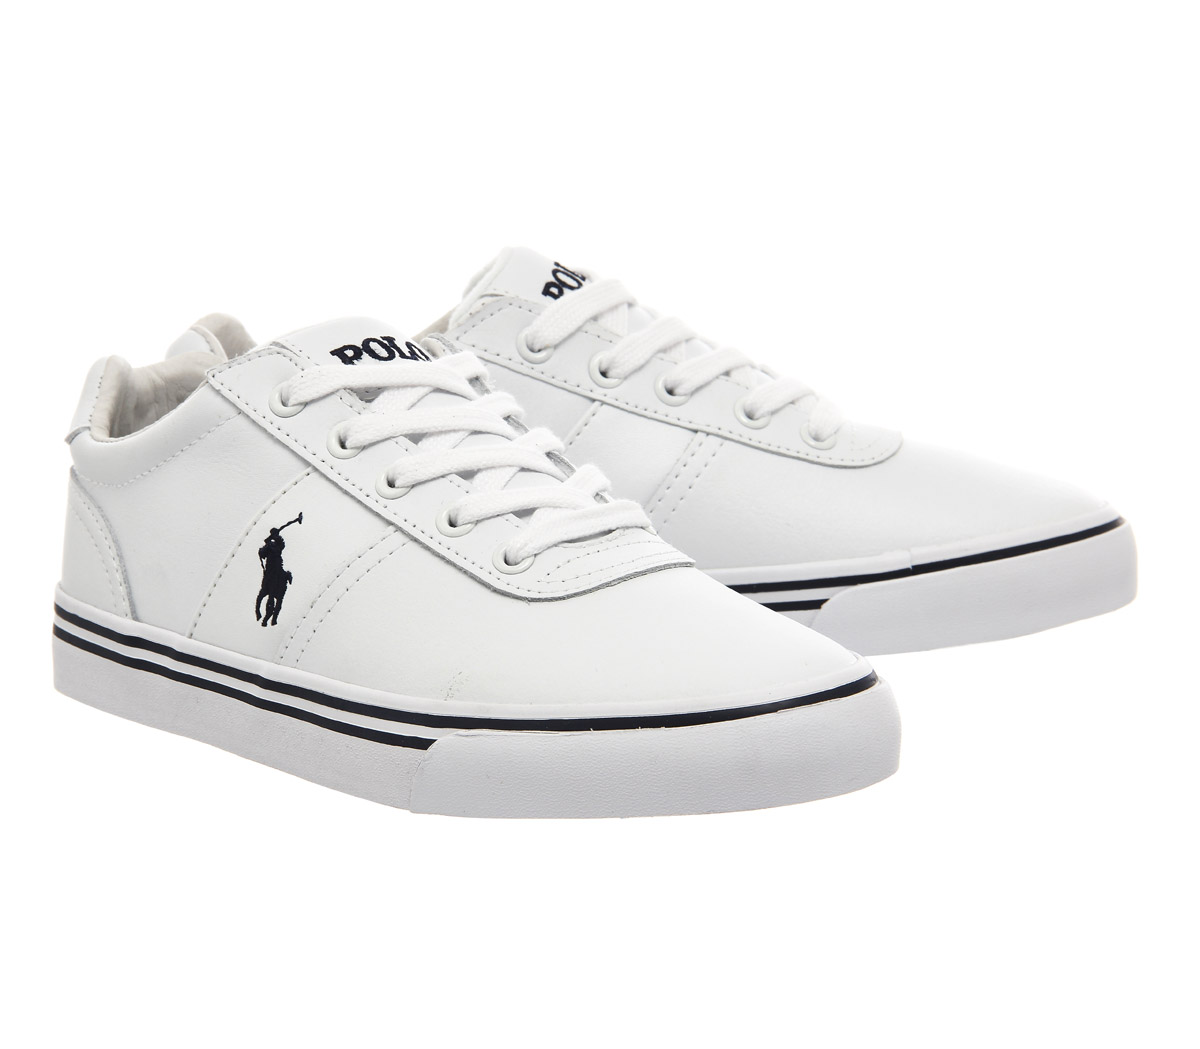 Ralph Lauren Hanford White Leather - His trainers